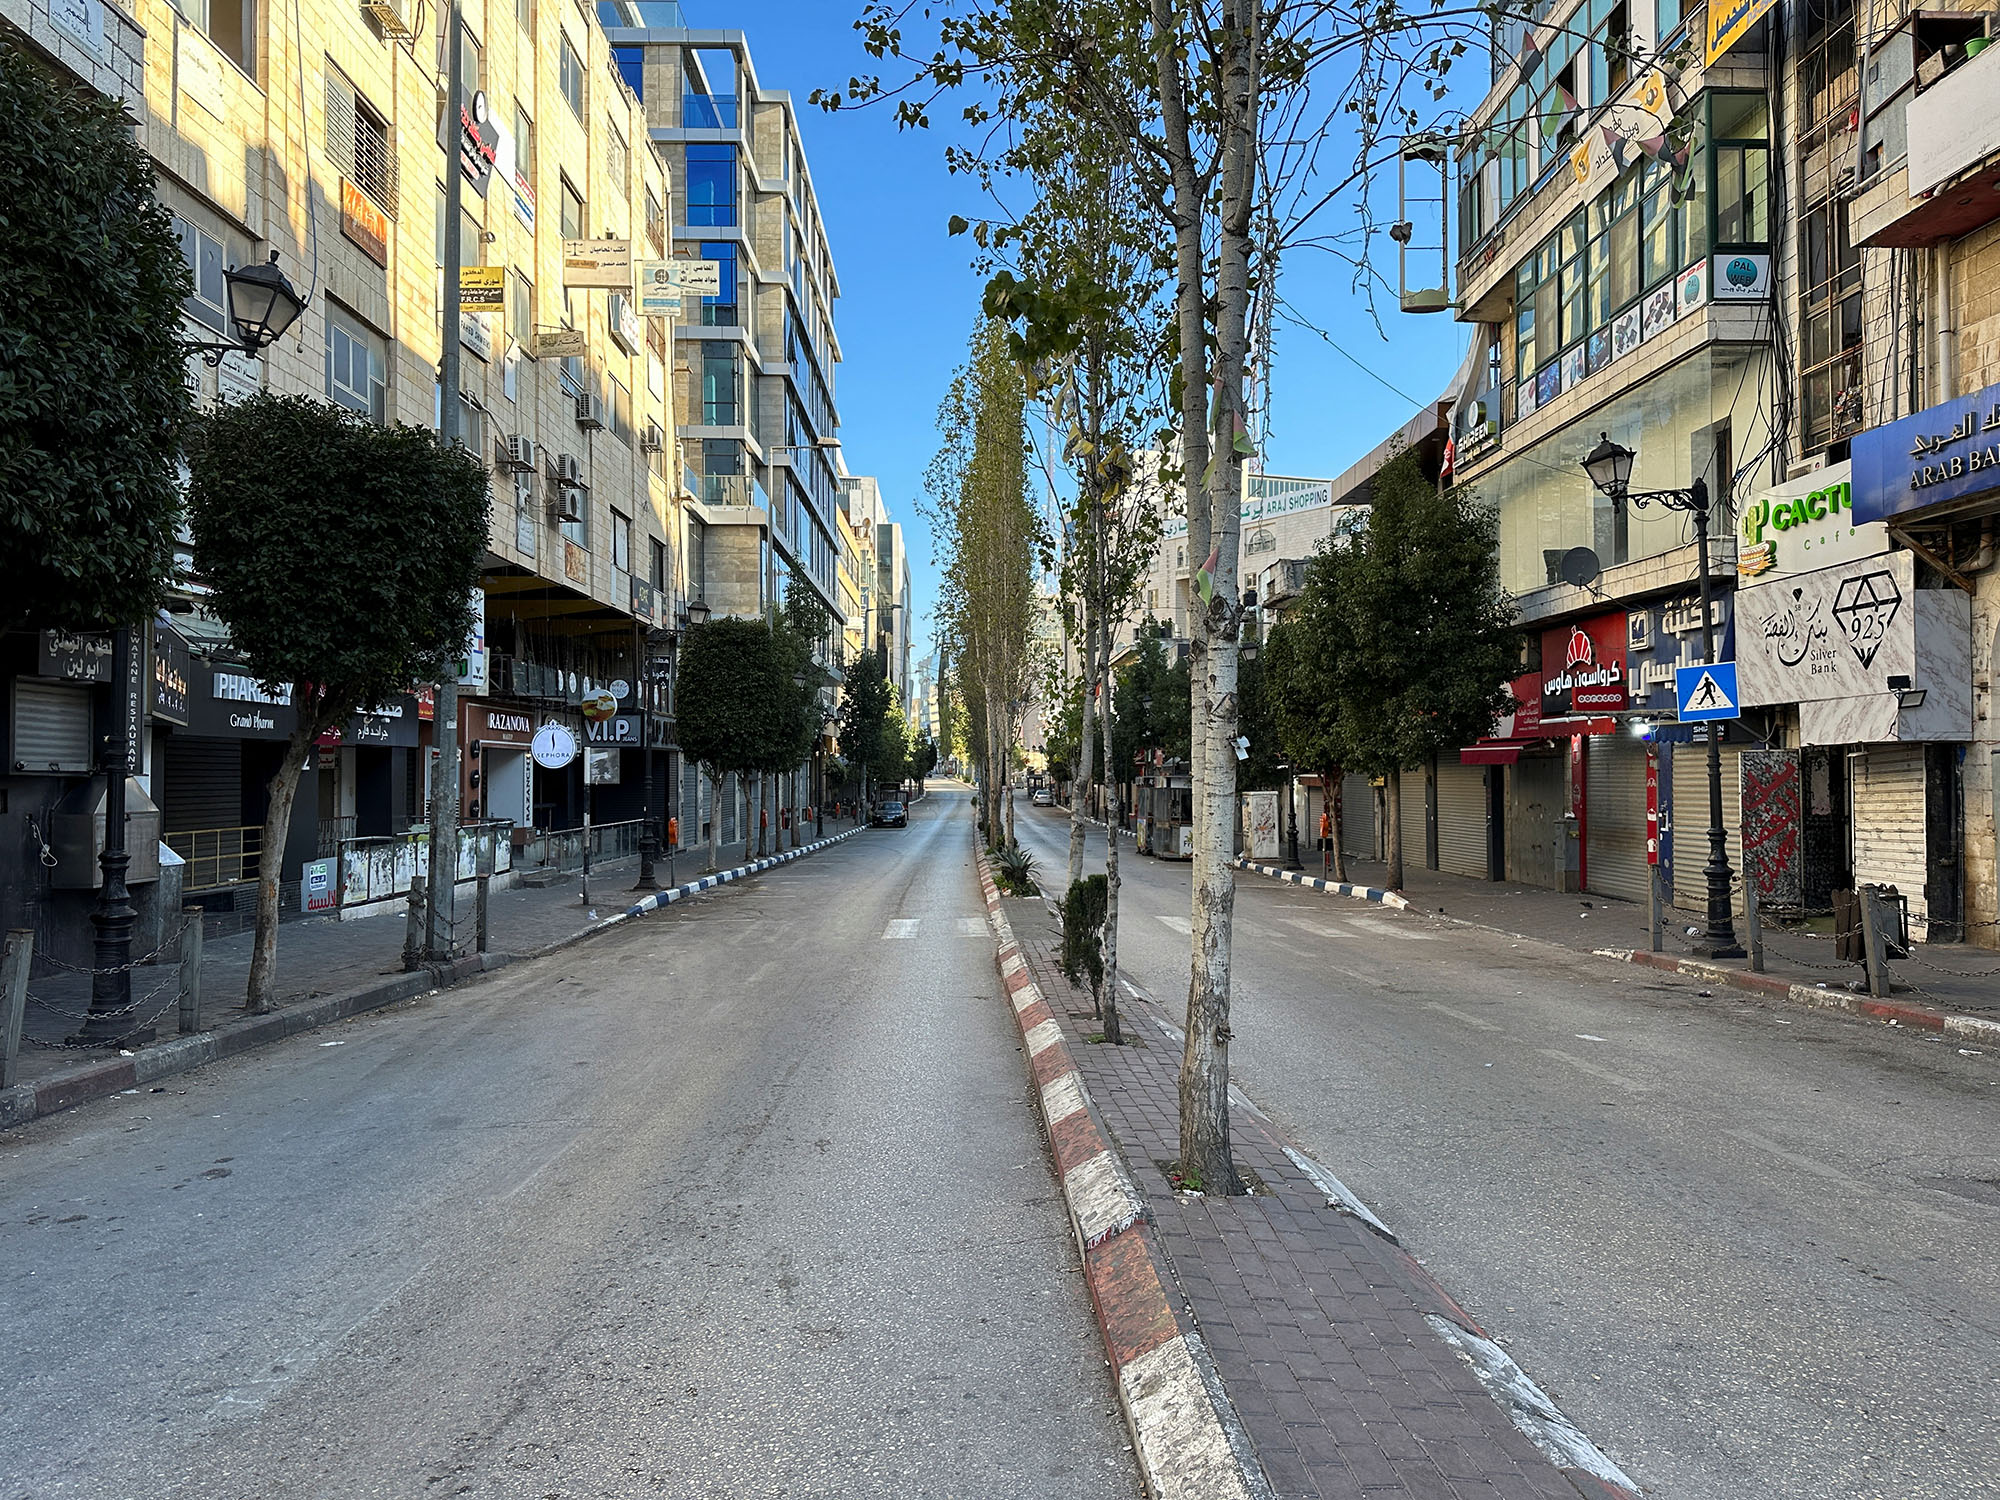 A view of empty streets in Ramallah in the Israeli-occupied West Bank during a general strike in solidarity with Palestinians on December 11.